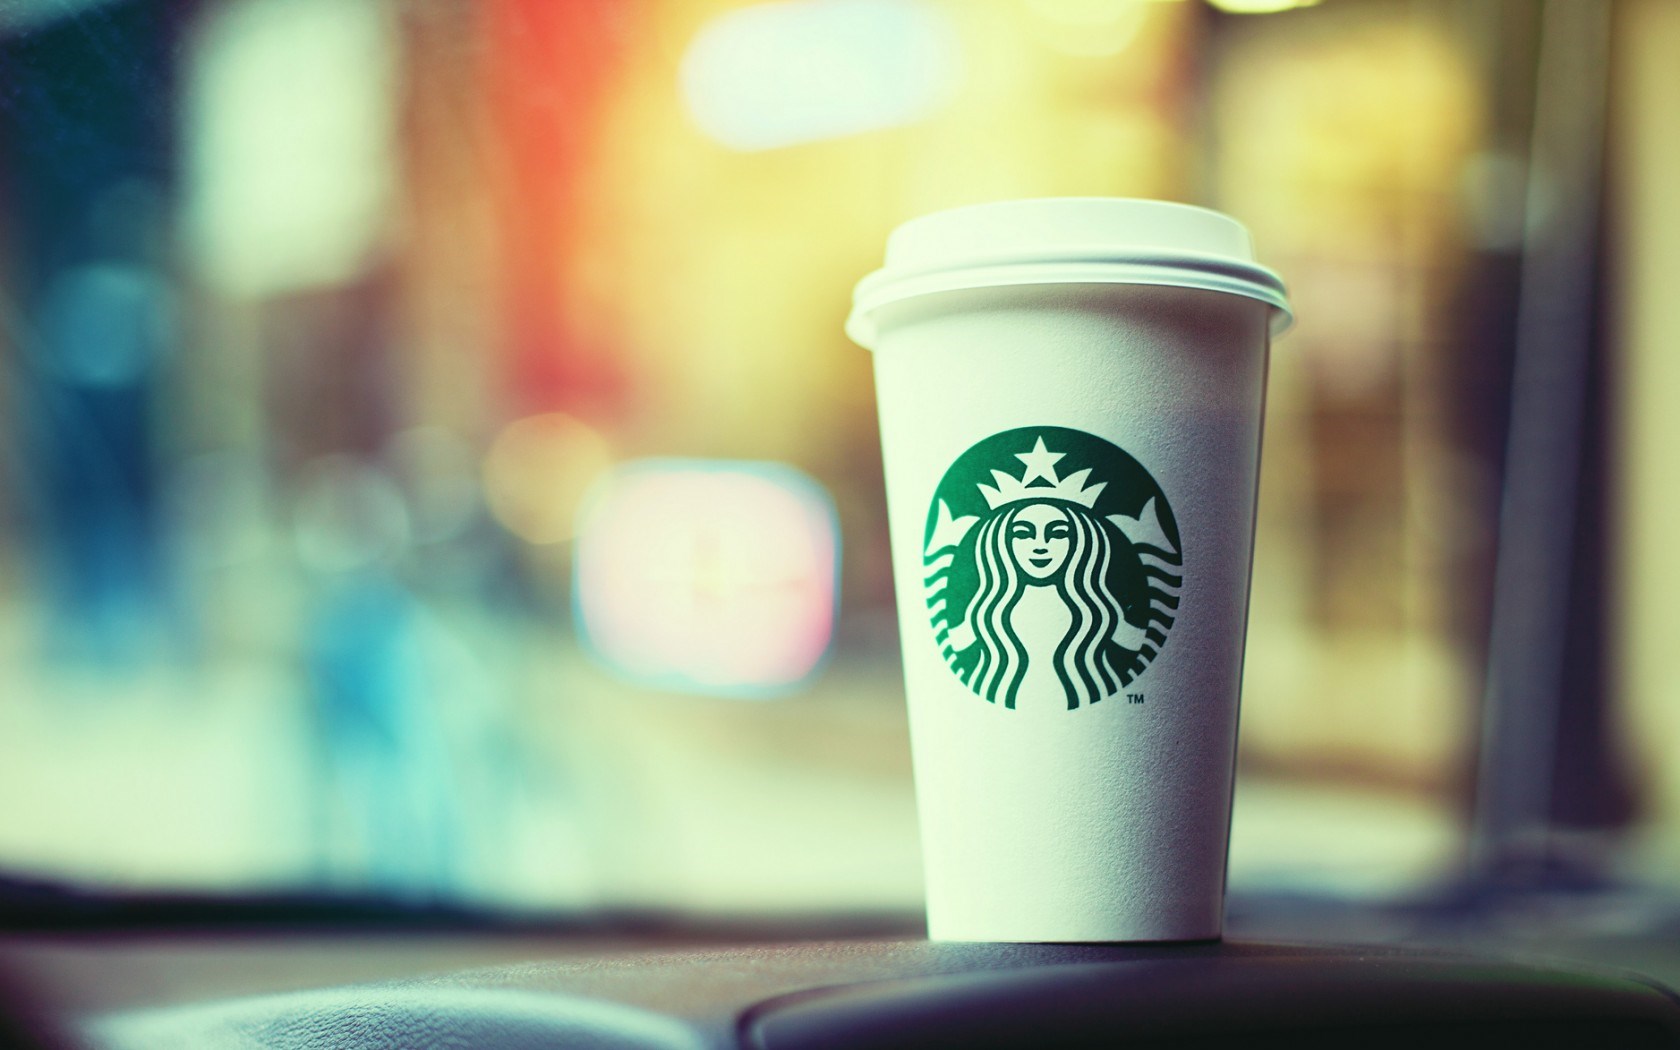 Wallpapers Hd Starbucks Cup High Definitions Backgrounds